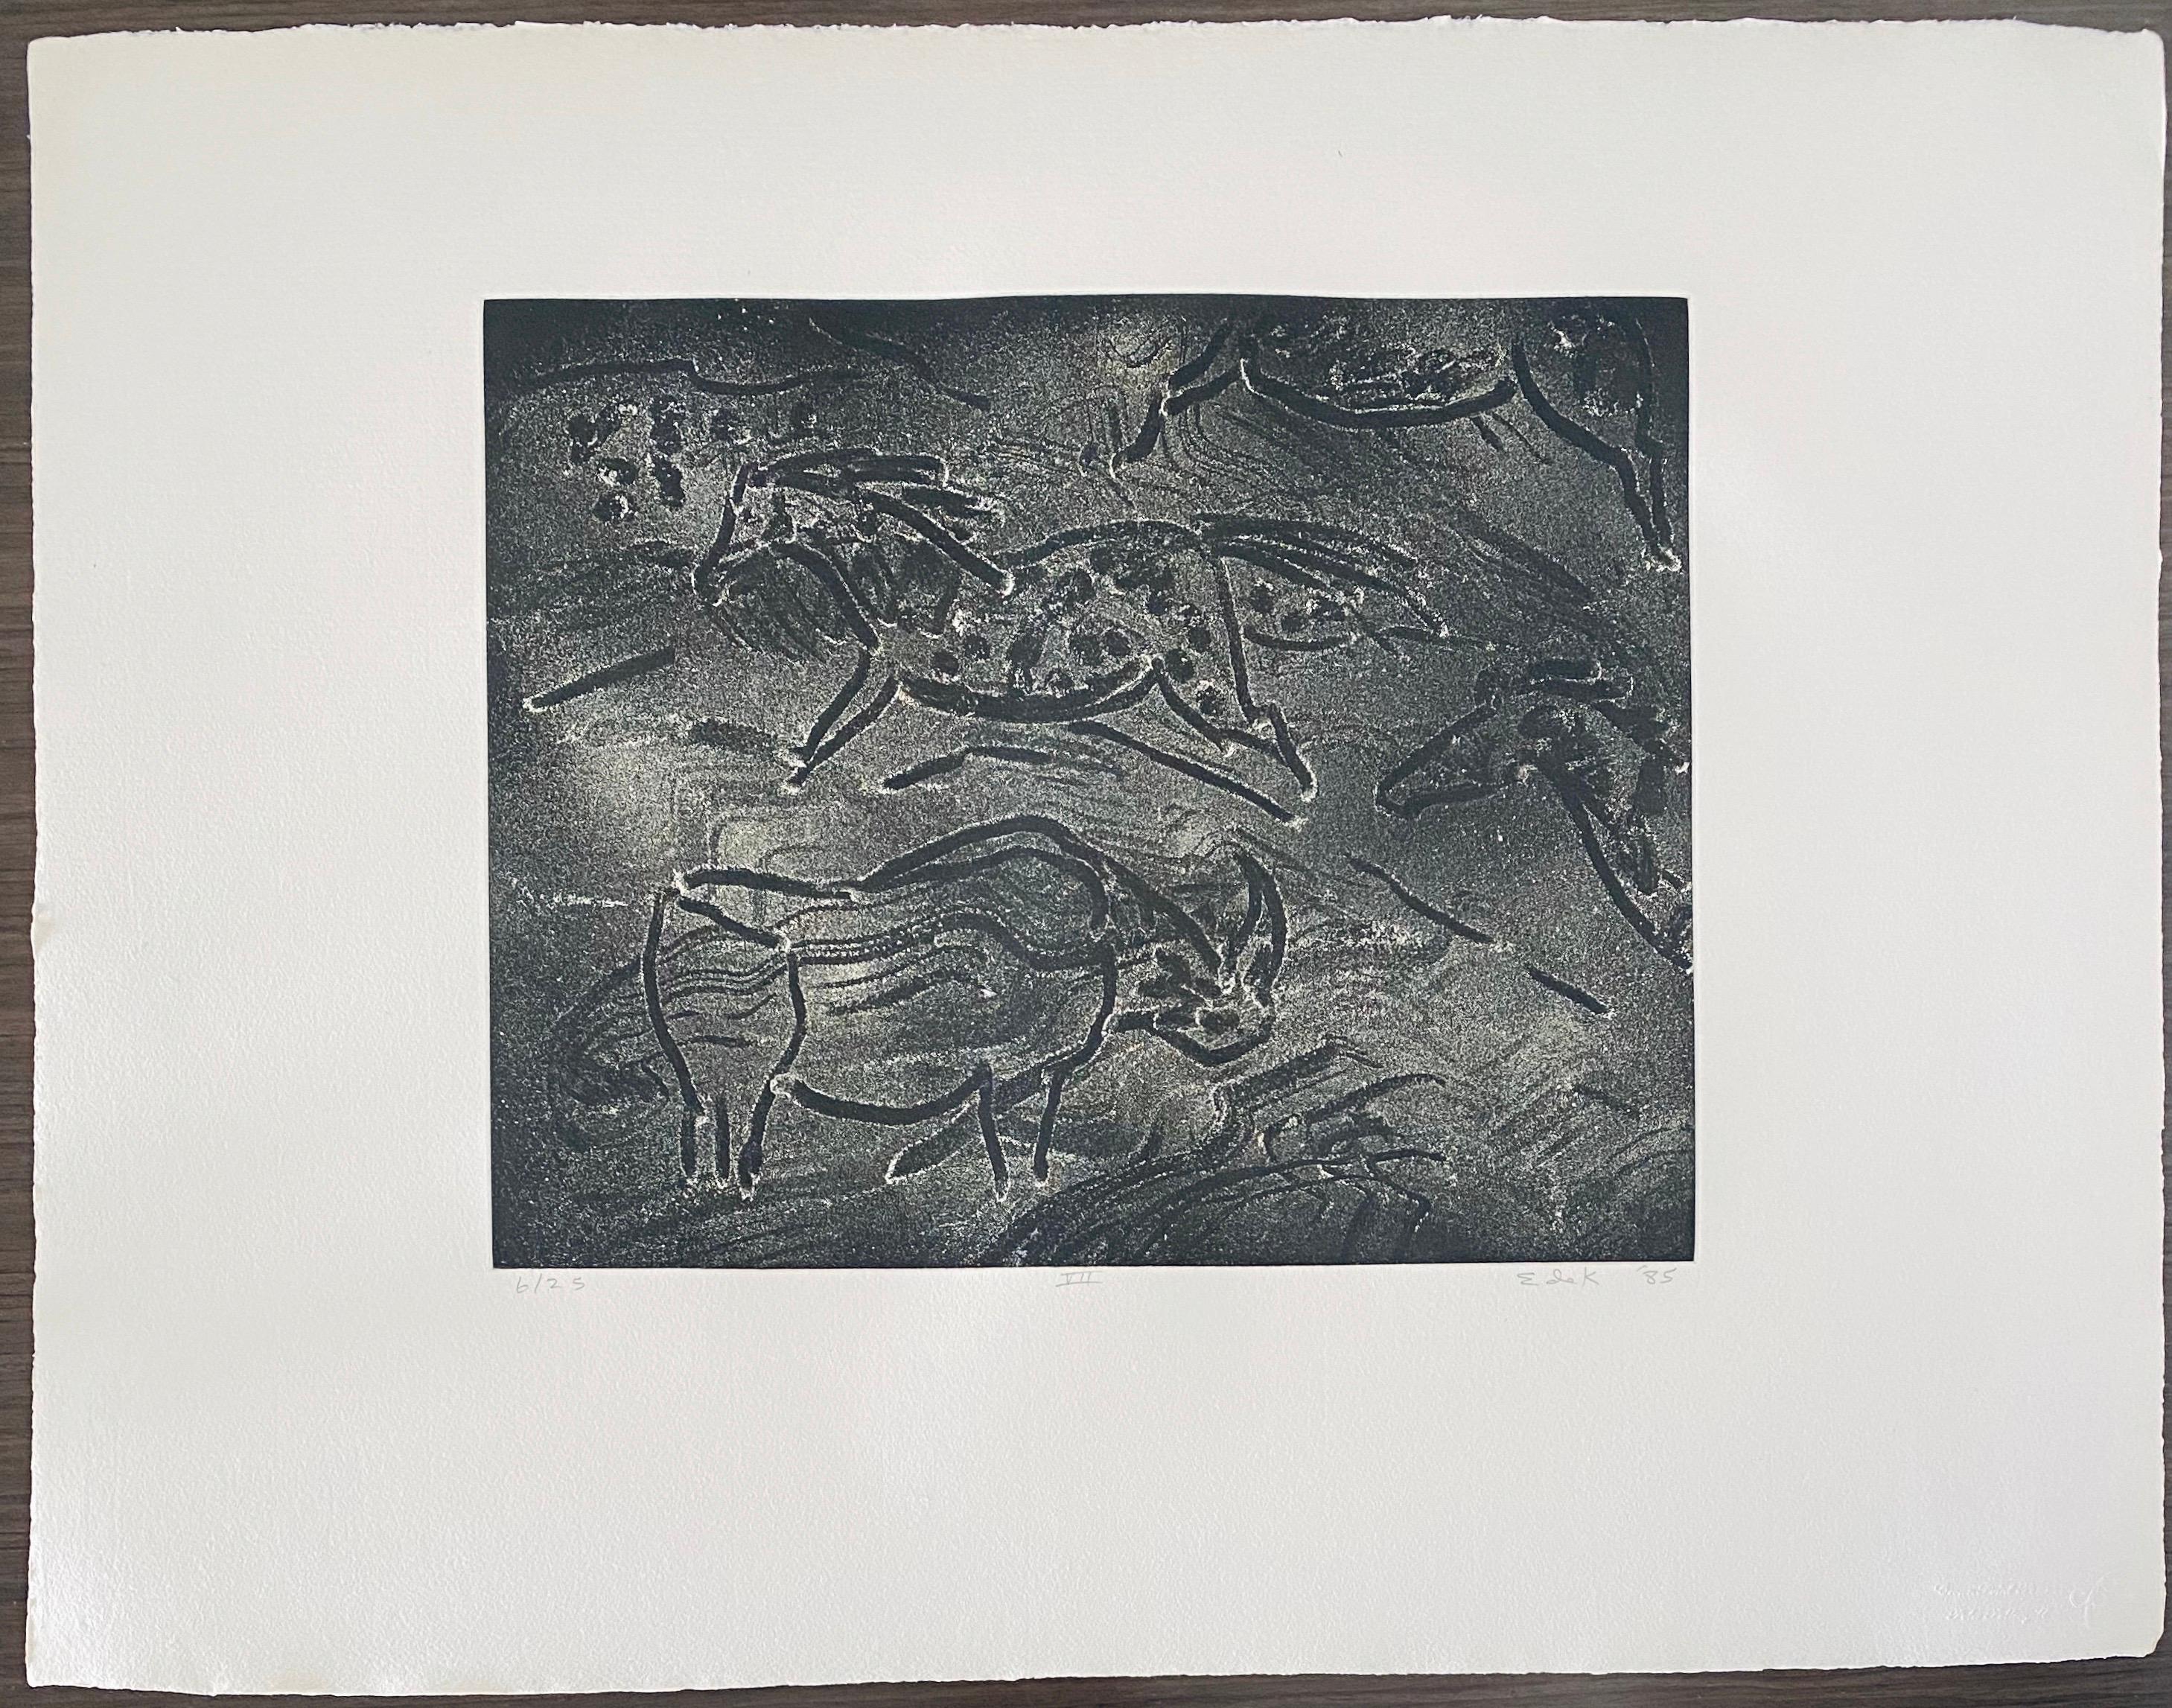 Abstract Expressionist Aquatint Etching Elaine de Kooning Animal Cave Drawing 9